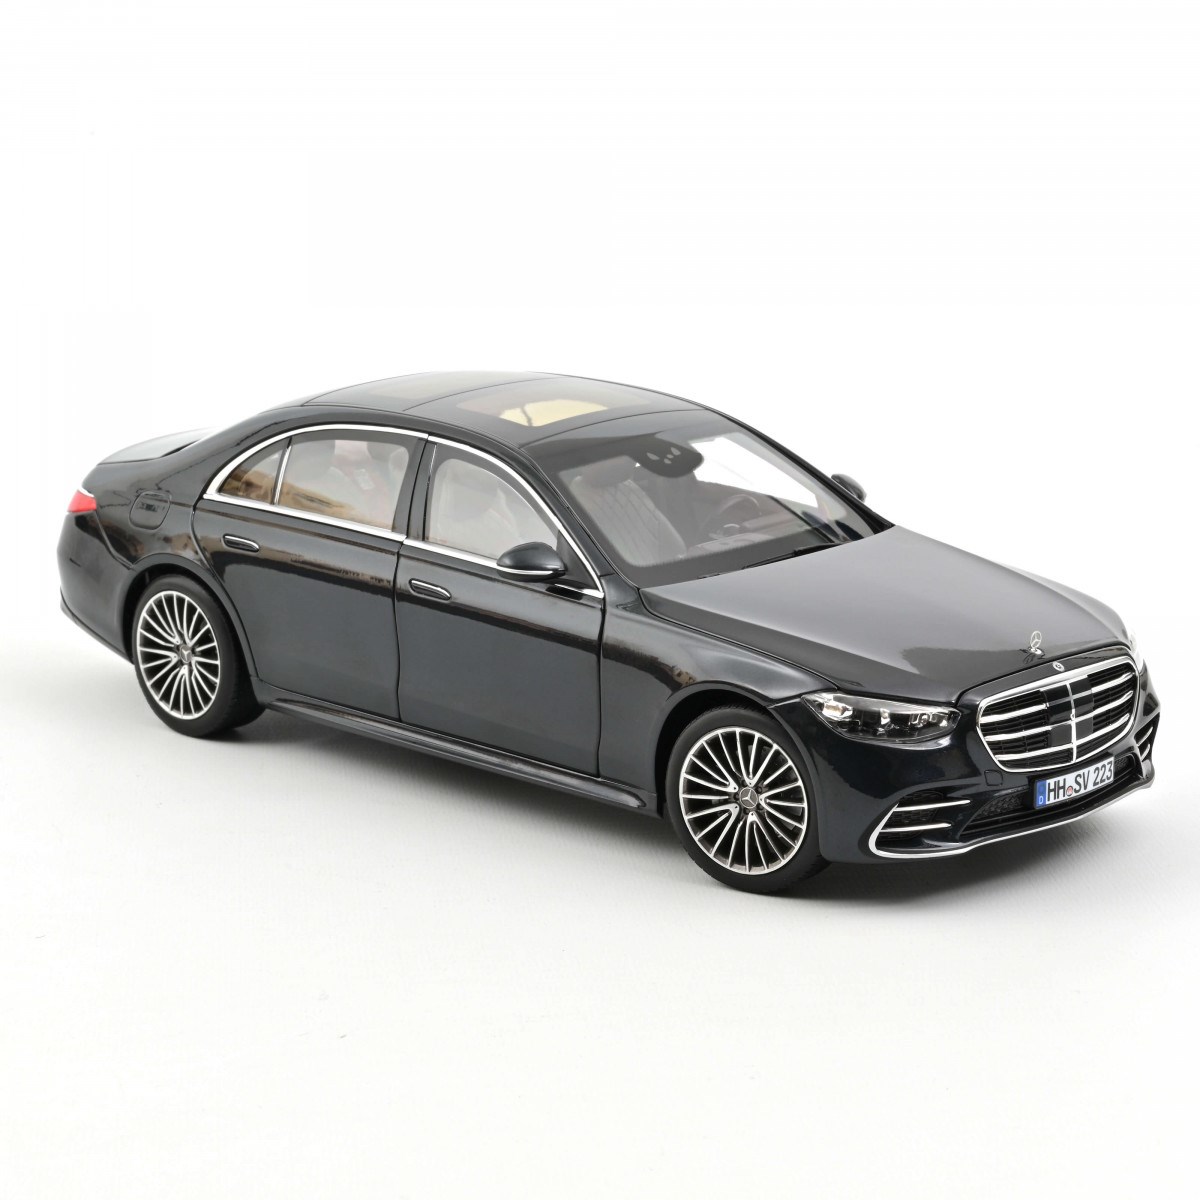 2018 Mercedes S Class AMG Line Silver Metallic 1/18 Diecast Model Car by Norev 183479